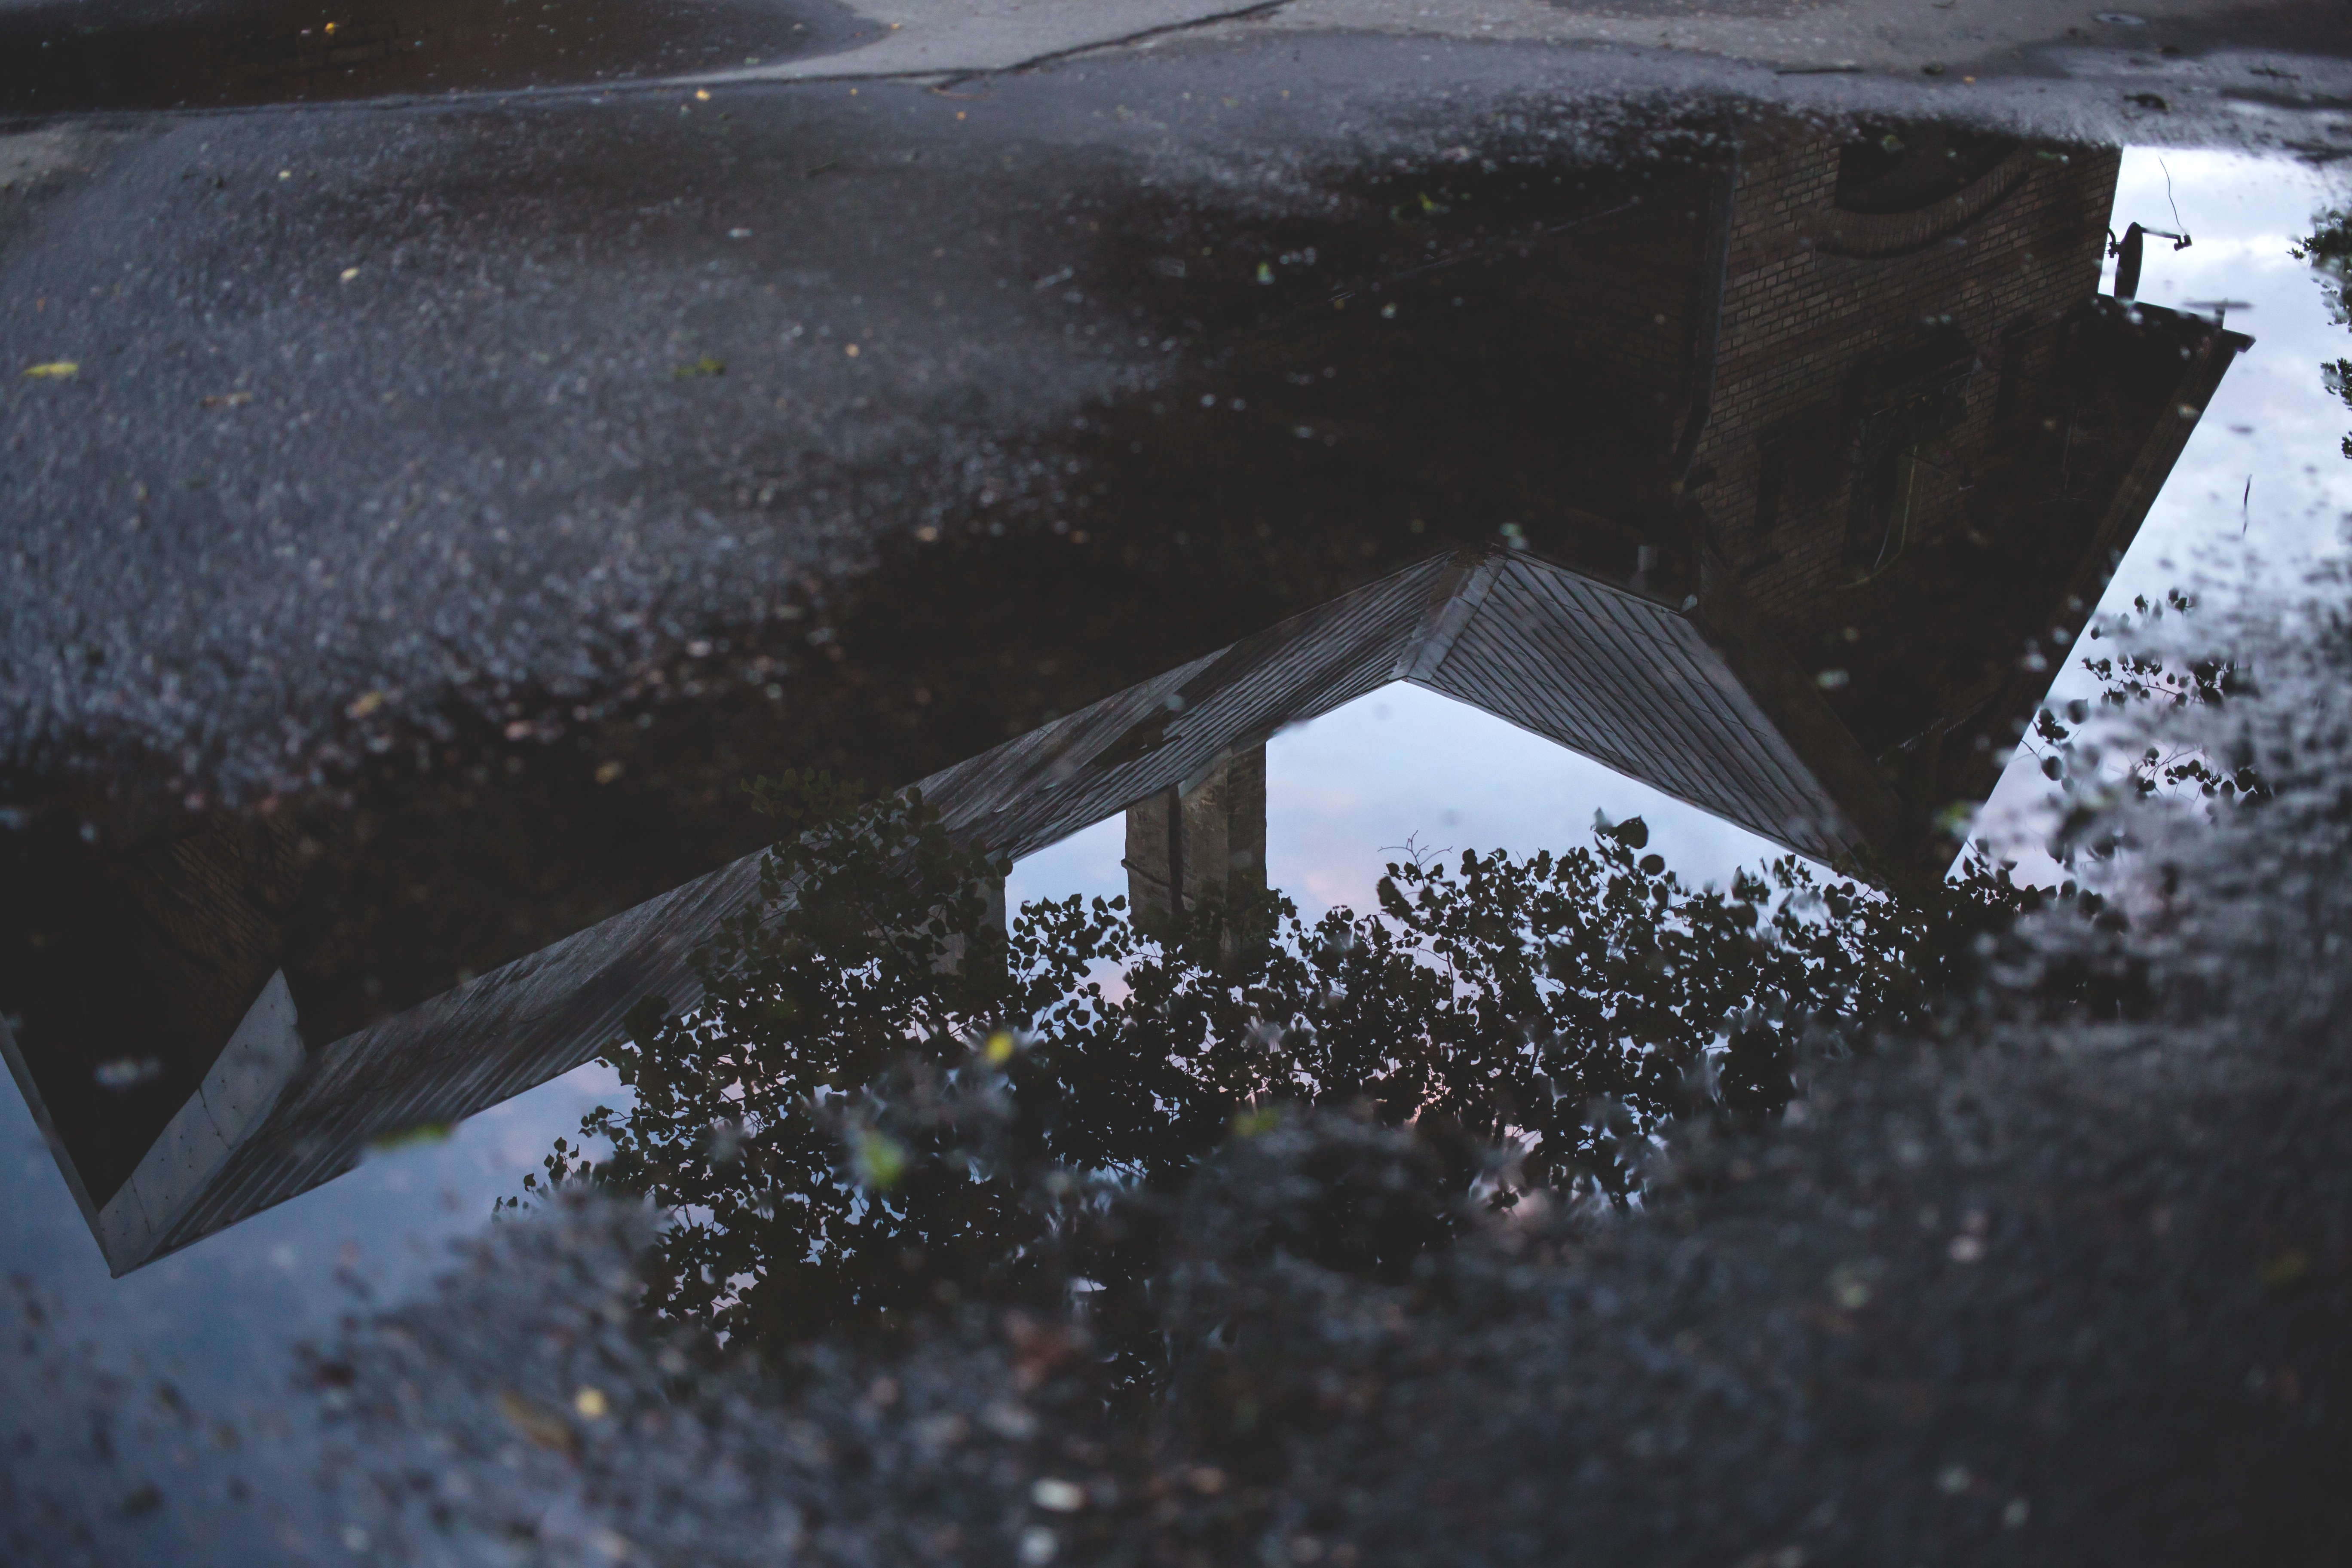 Relfection in the puddle, Asphalt, Reflection, Water, Trees, HQ Photo